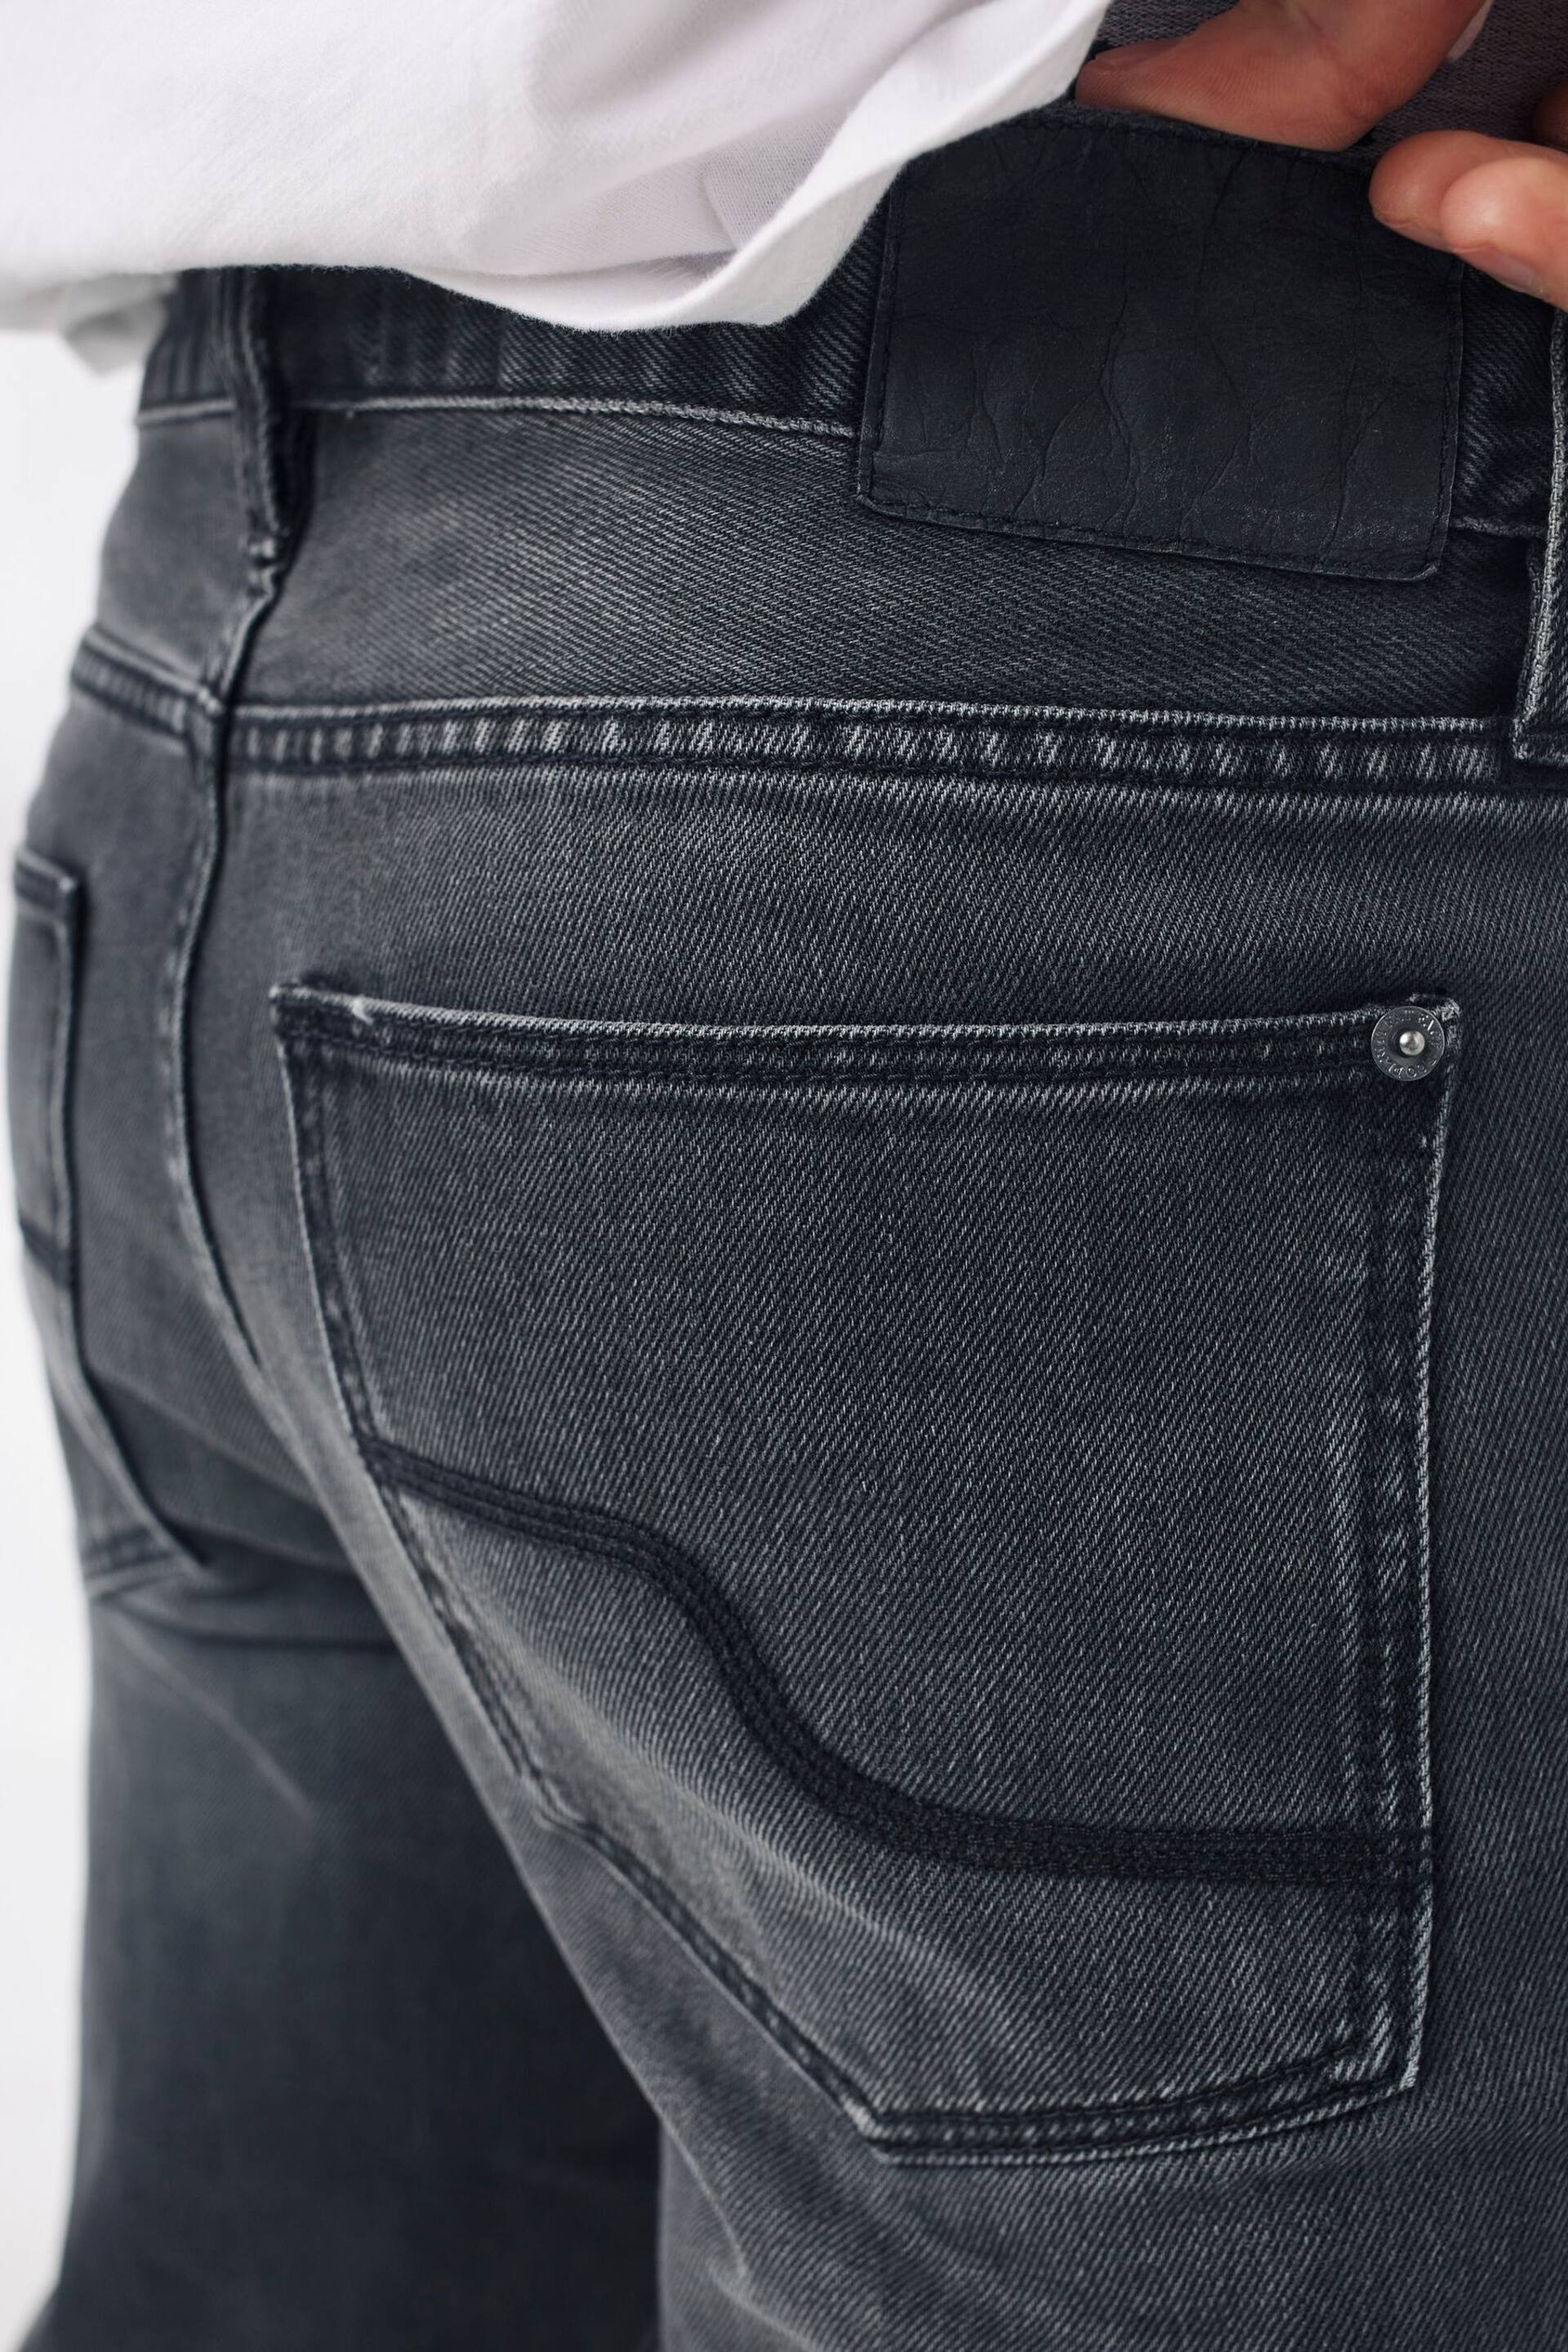 FatFace Grey Bootcut Jeans - Image 4 of 5